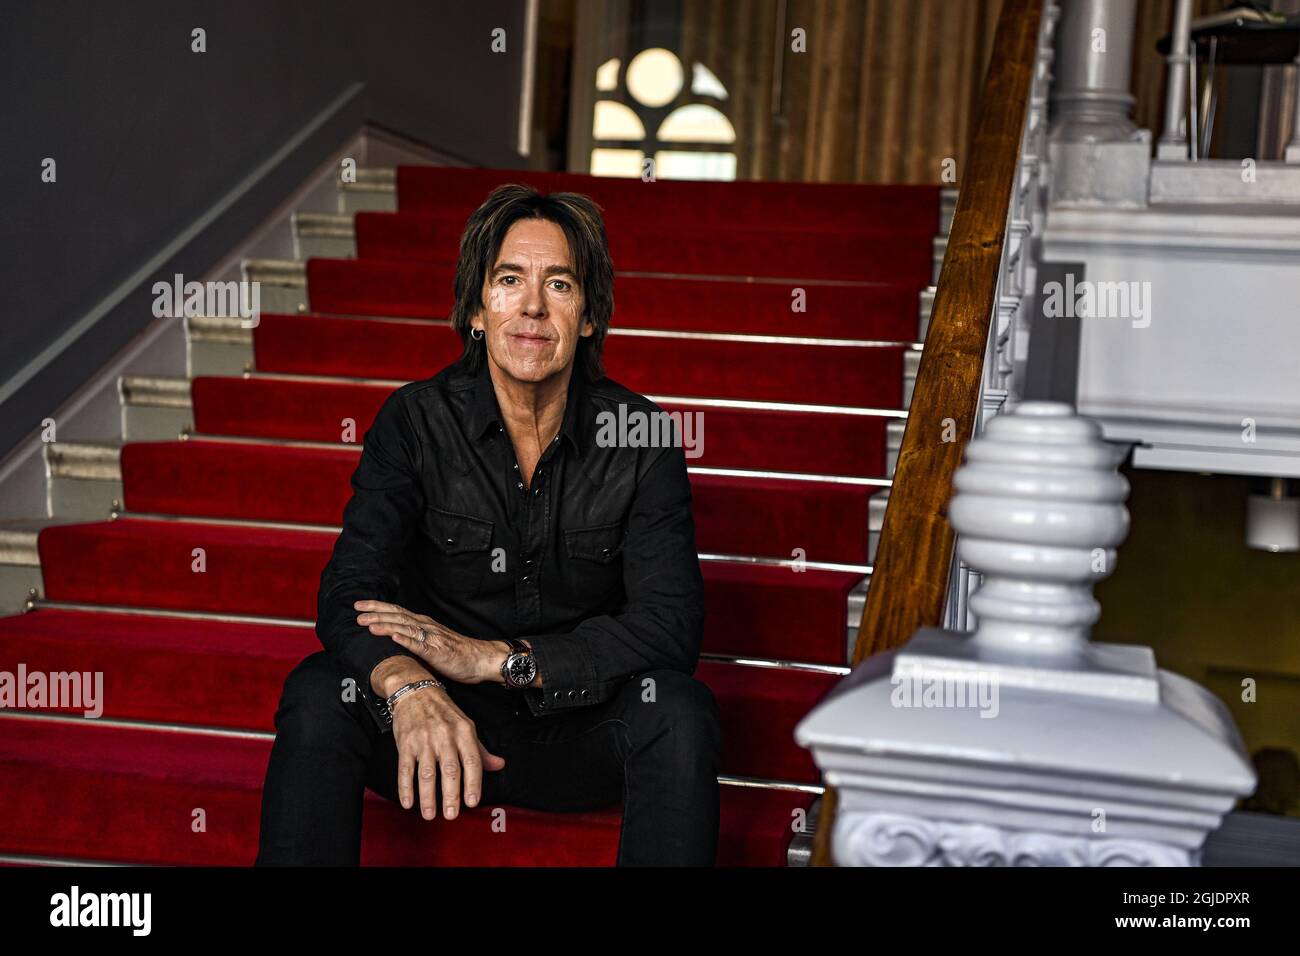 Per Gessle has released his new Swedish solo album 'Gammal kÃ¤rlek rostar aldrig' and the Roxette box 'Bag of trix - music from the Roxette vaults'. Photo: Jimmy Wixtrom / Aftonbladet / TT code 2512 Stock Photo